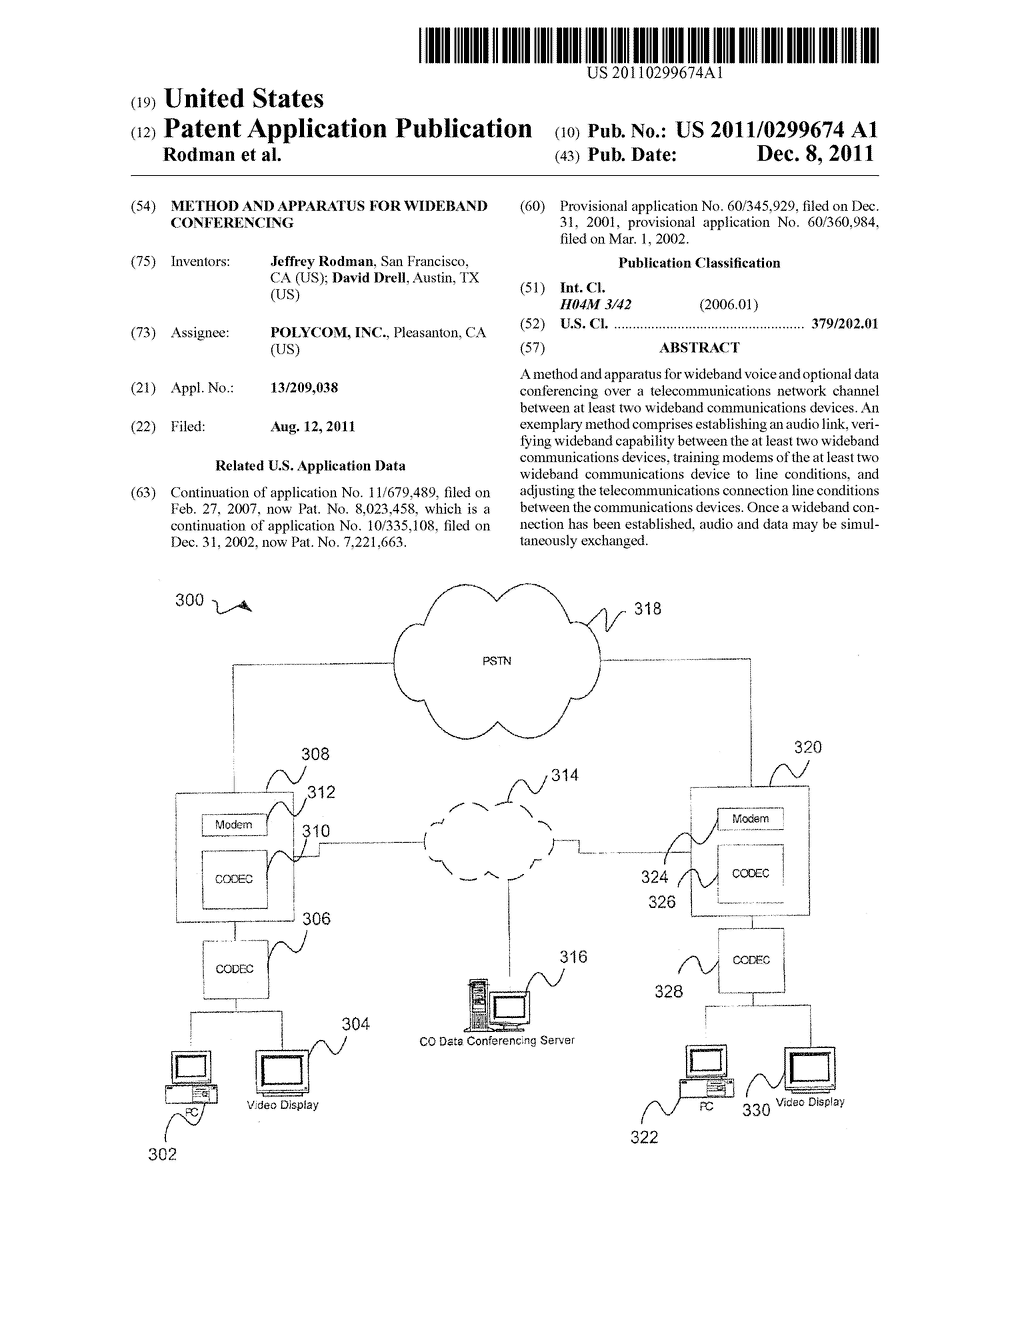 Method and Apparatus for Wideband Conferencing - diagram, schematic, and image 01